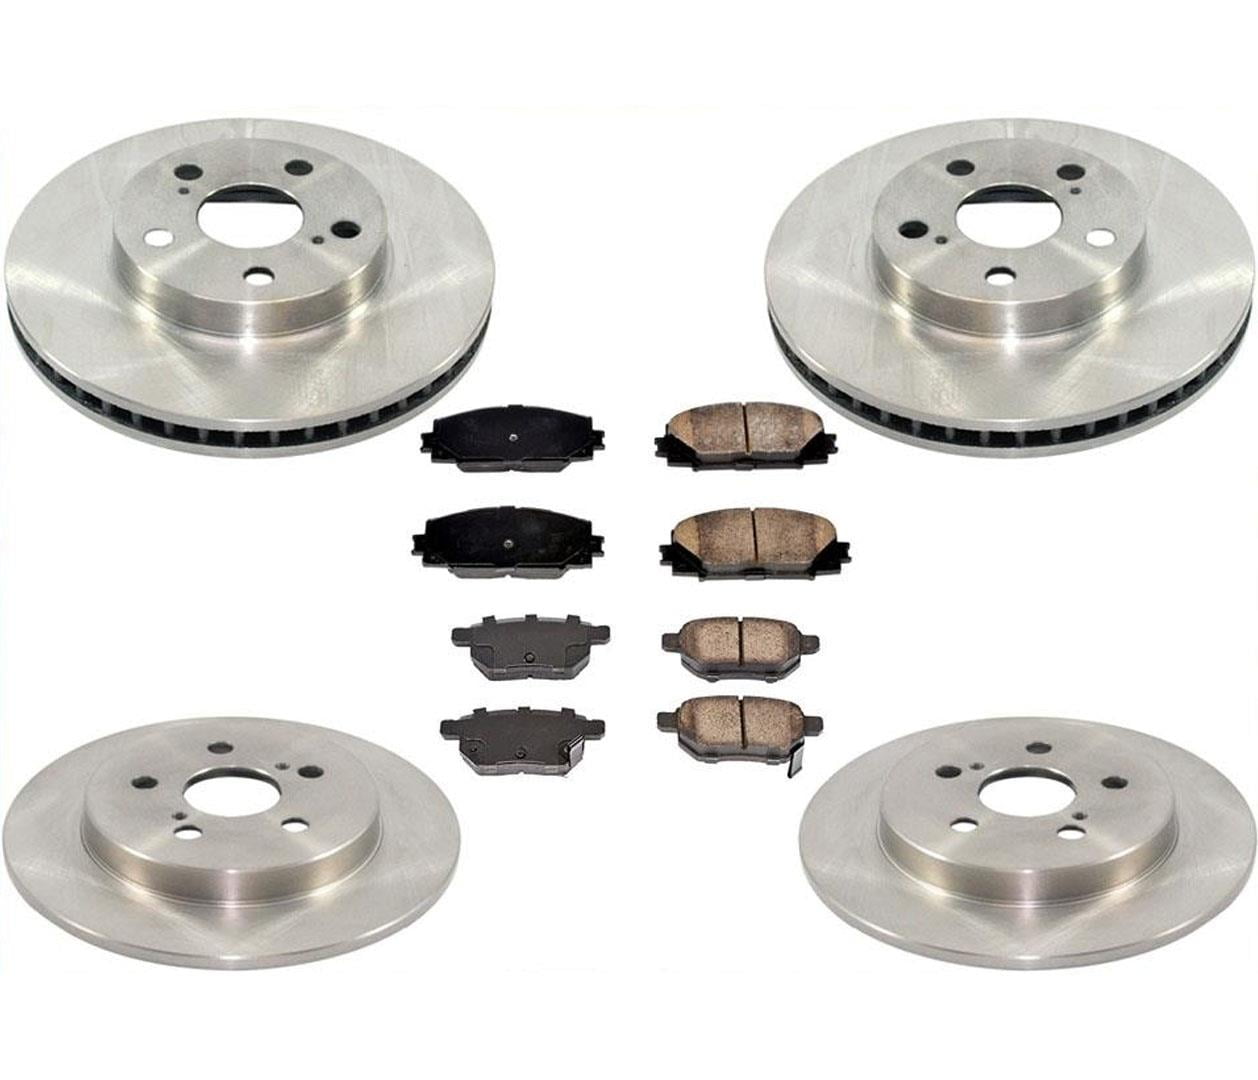 Transit Auto - Front Disc Brake Rotors And Ceramic Pads Kit For